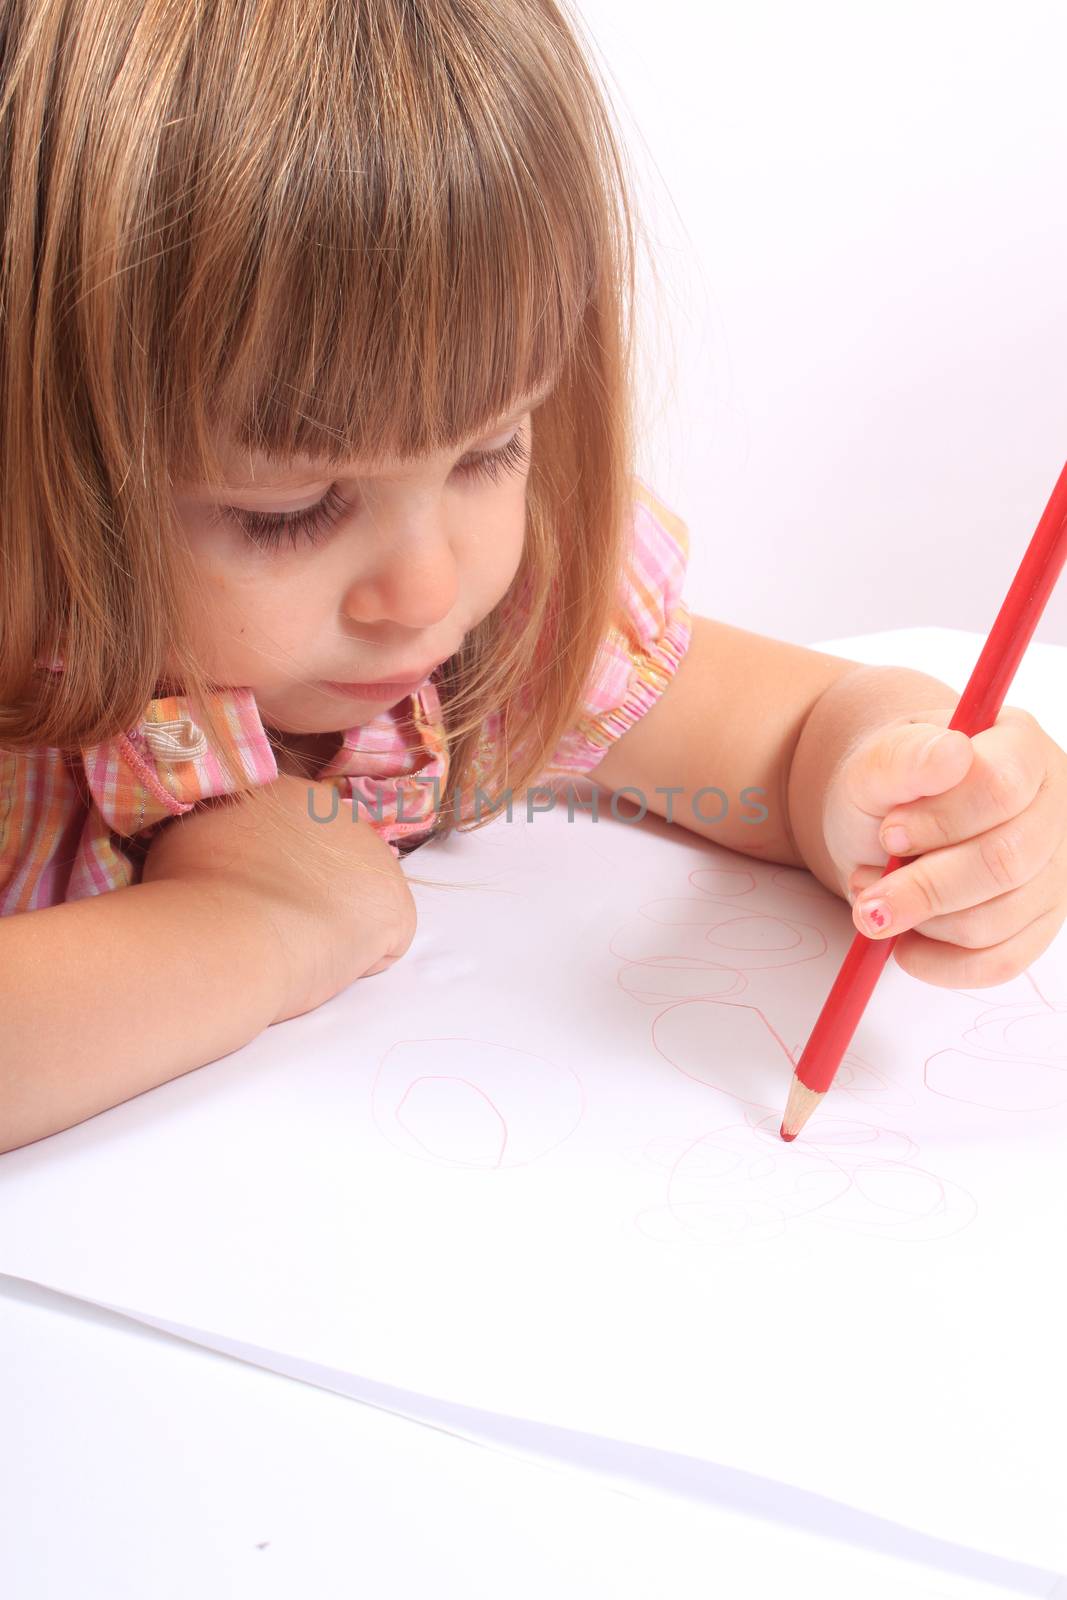 Cute little two year old girl draws pictures on white paper